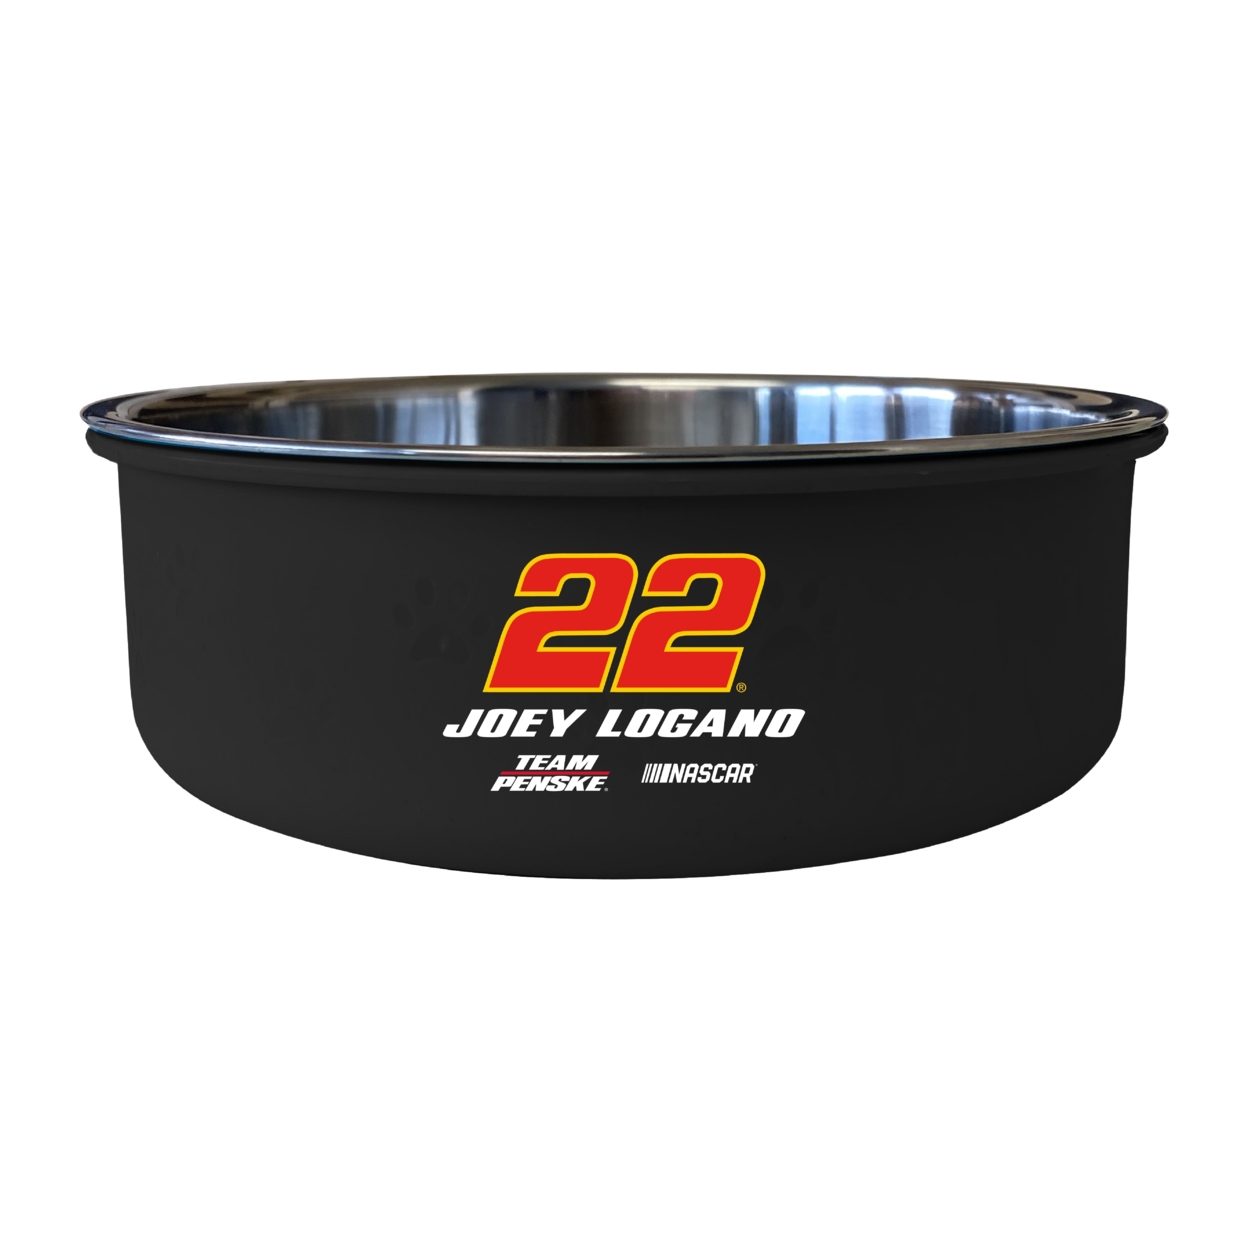 #22 Joey Logano Officially Licensed 5x2.25 Pet Bowl